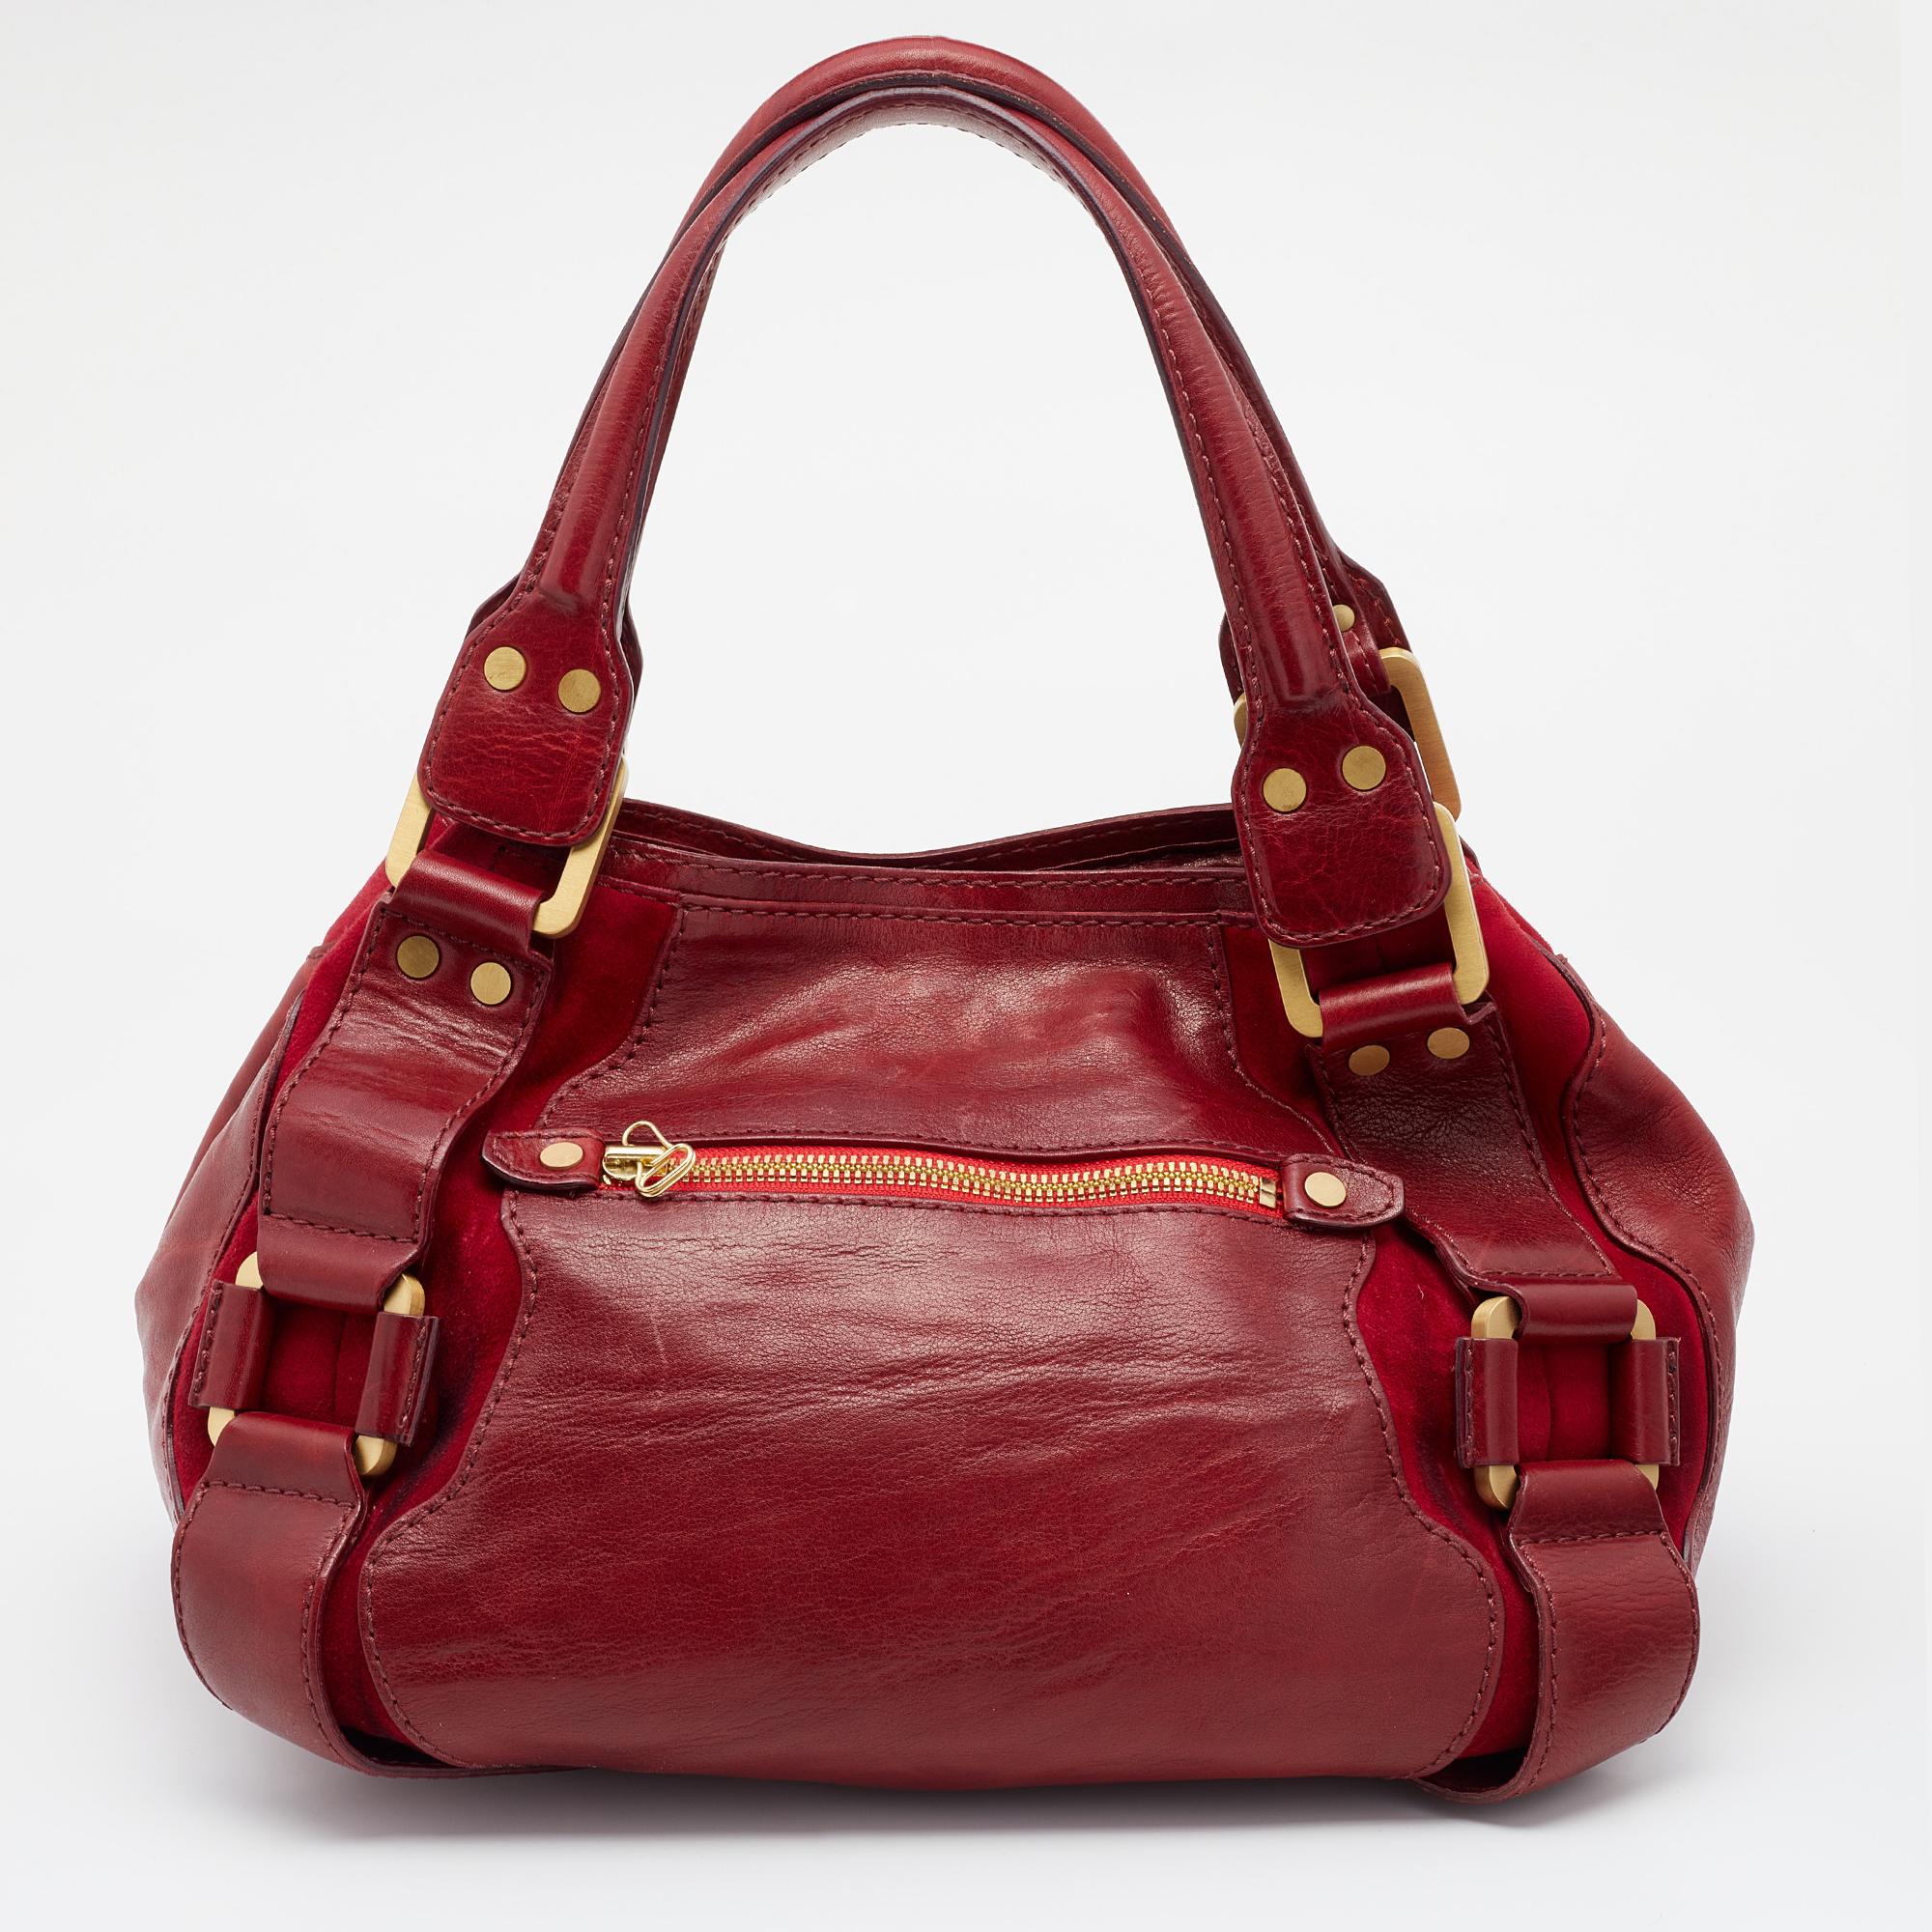 Step out in style by flaunting this stunning bag from Jimmy Choo. It has been crafted from leather and suede and shows the brand logo on the front. The red bag features dual handles, gold-tone zippers, and a spacious interior for all your essential